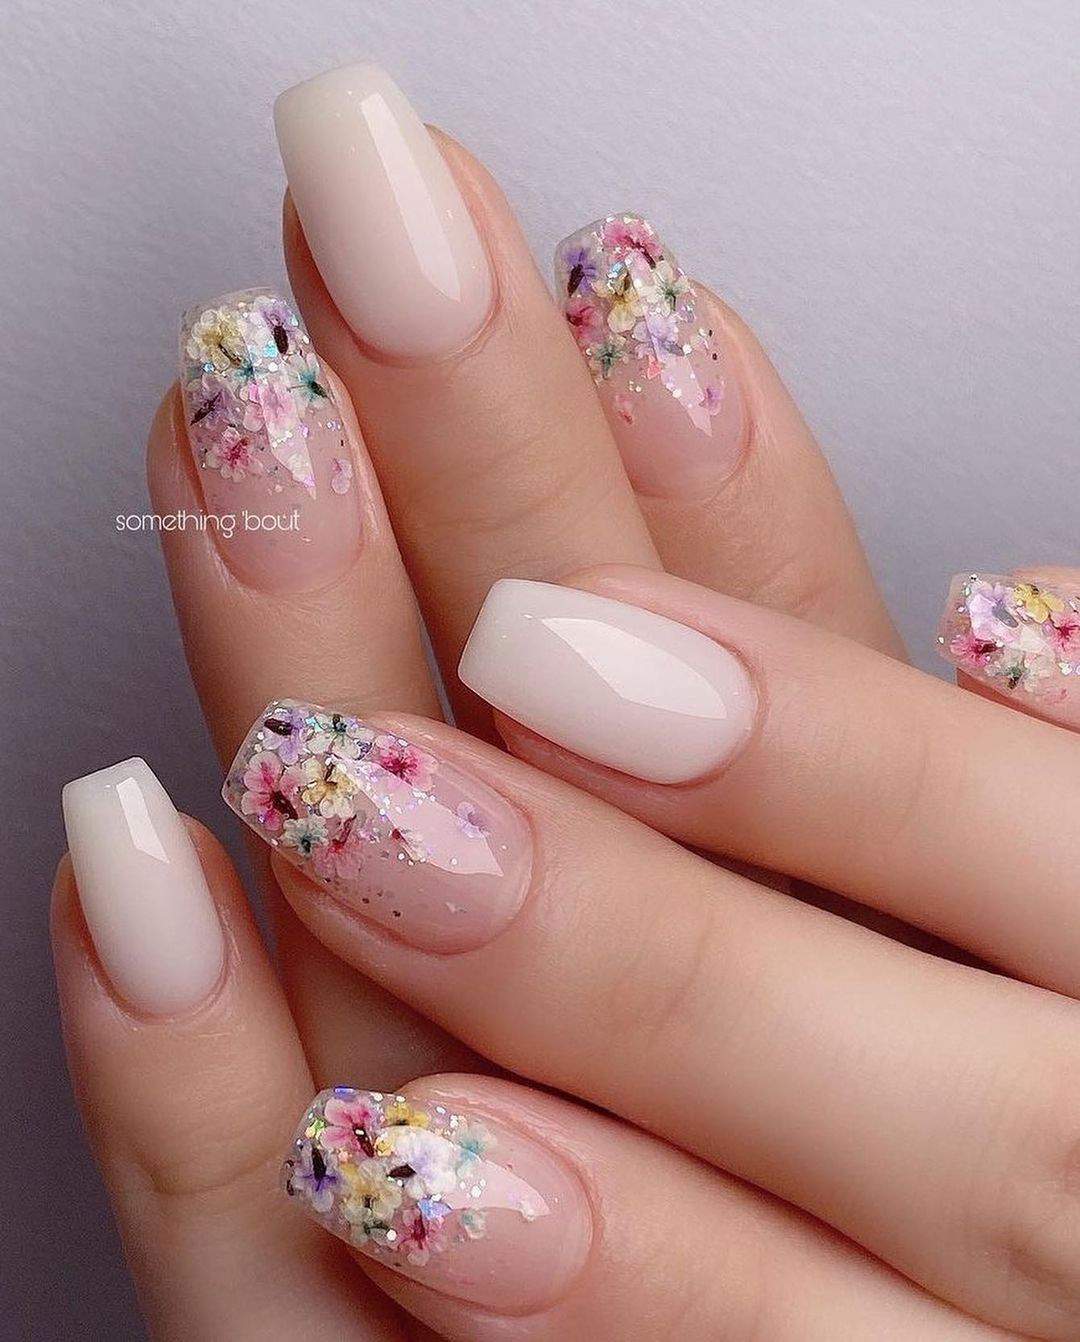 The 100+ Best Nail Designs Trends And Ideas In 2021 images 19